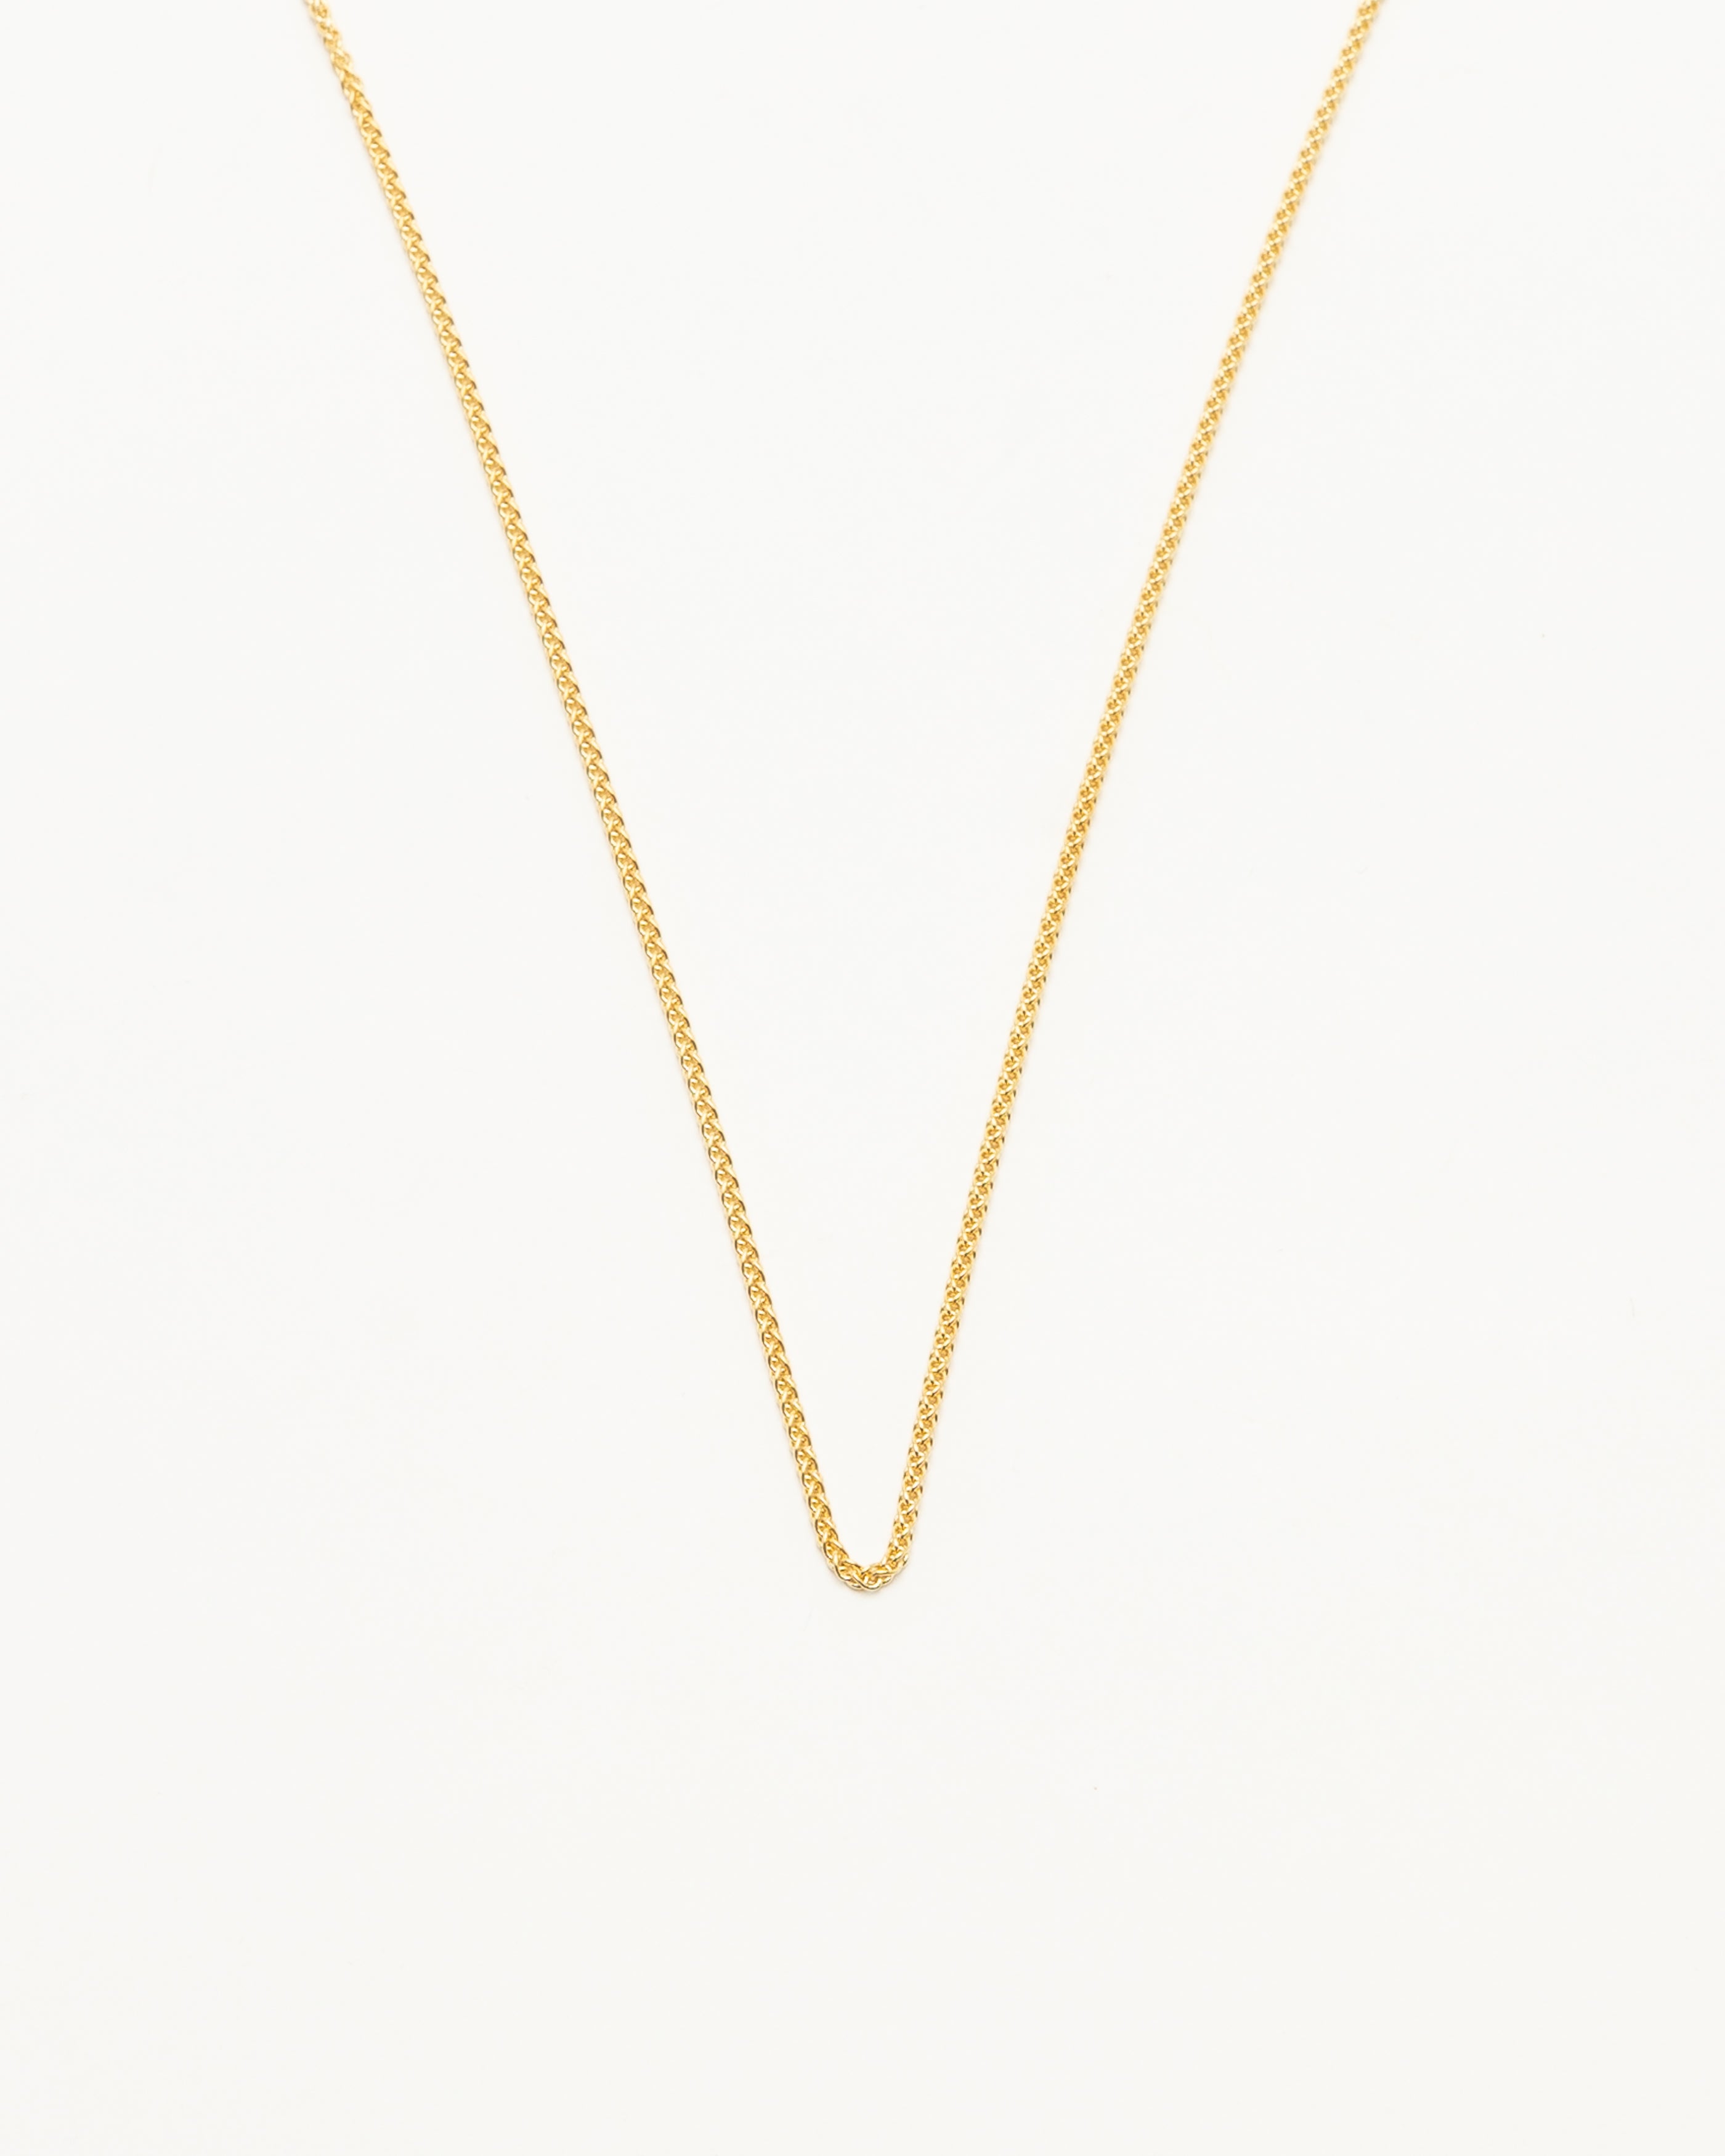 Spike Chain in 9k Gold